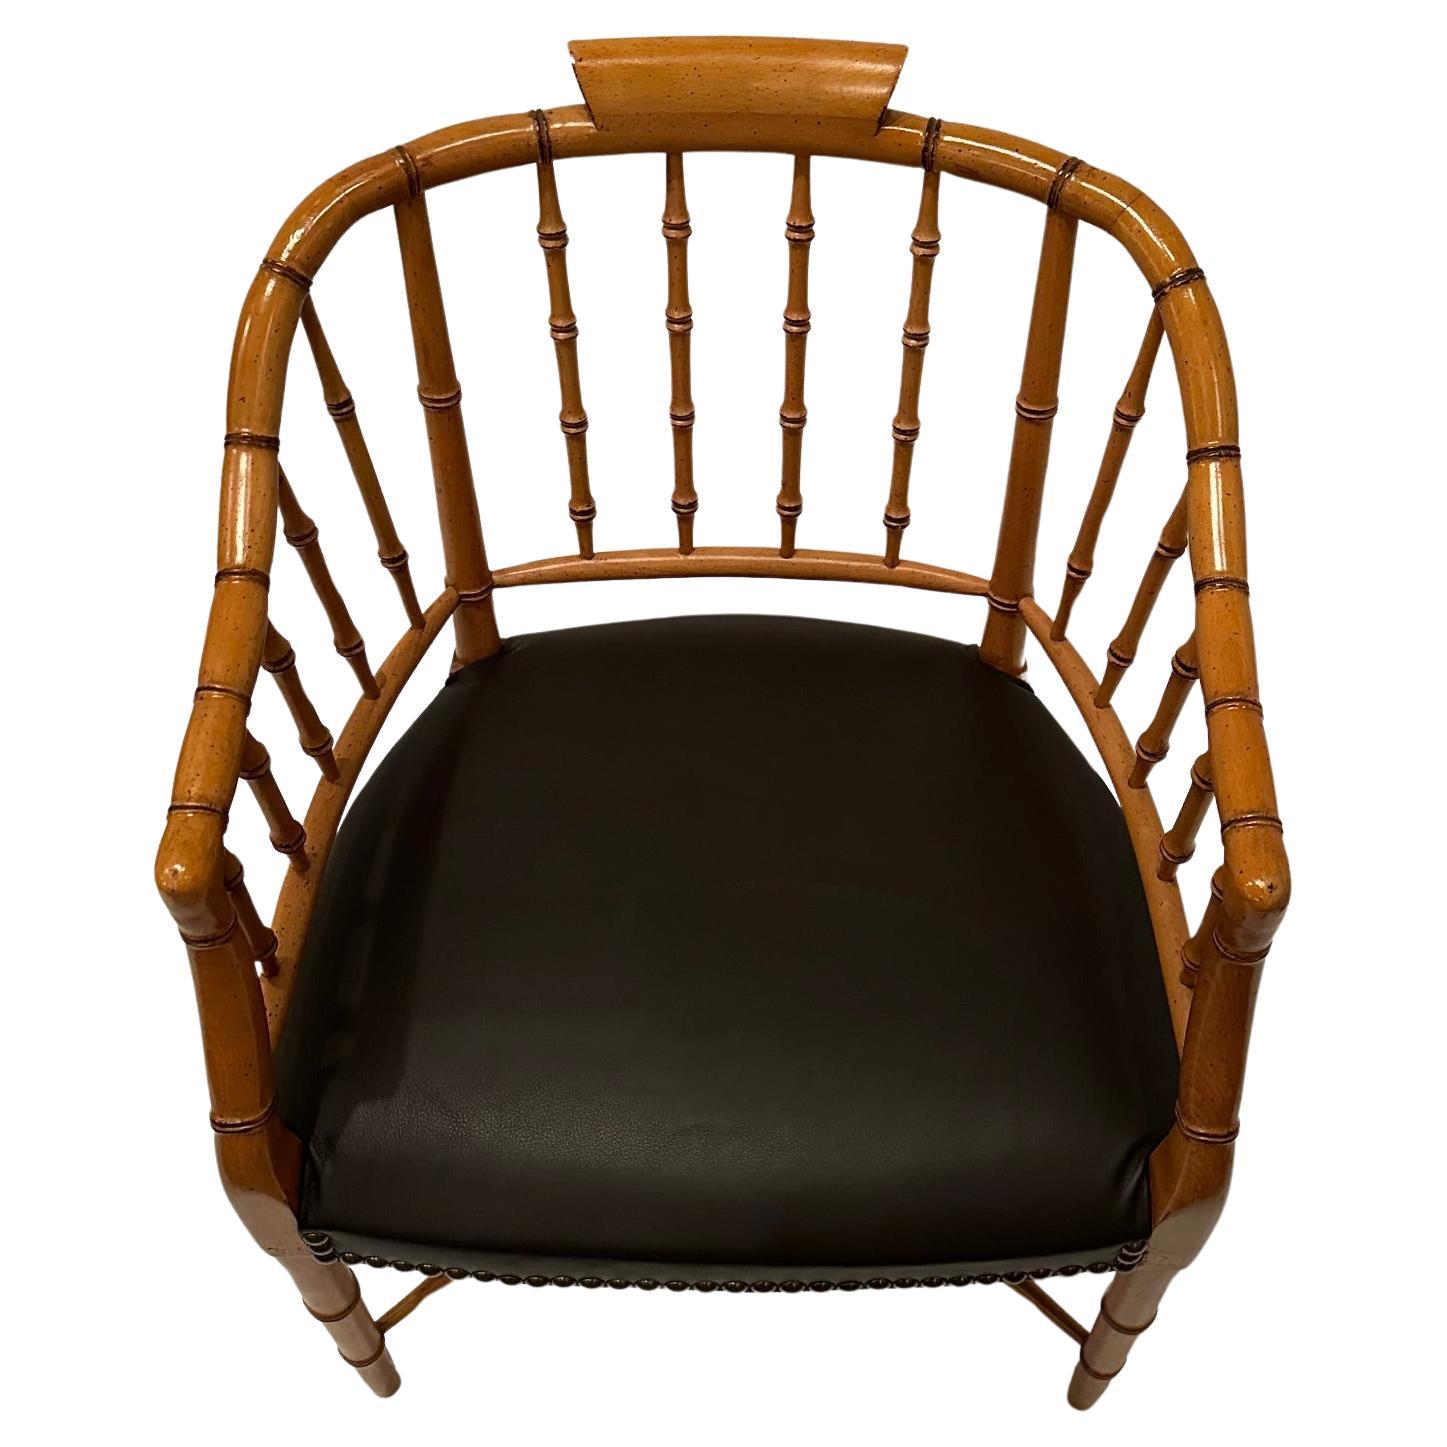 Sophisticated faux bamboo armchair newly upholstered in chocolate leather and finished with brass nailheads.  arm height 27